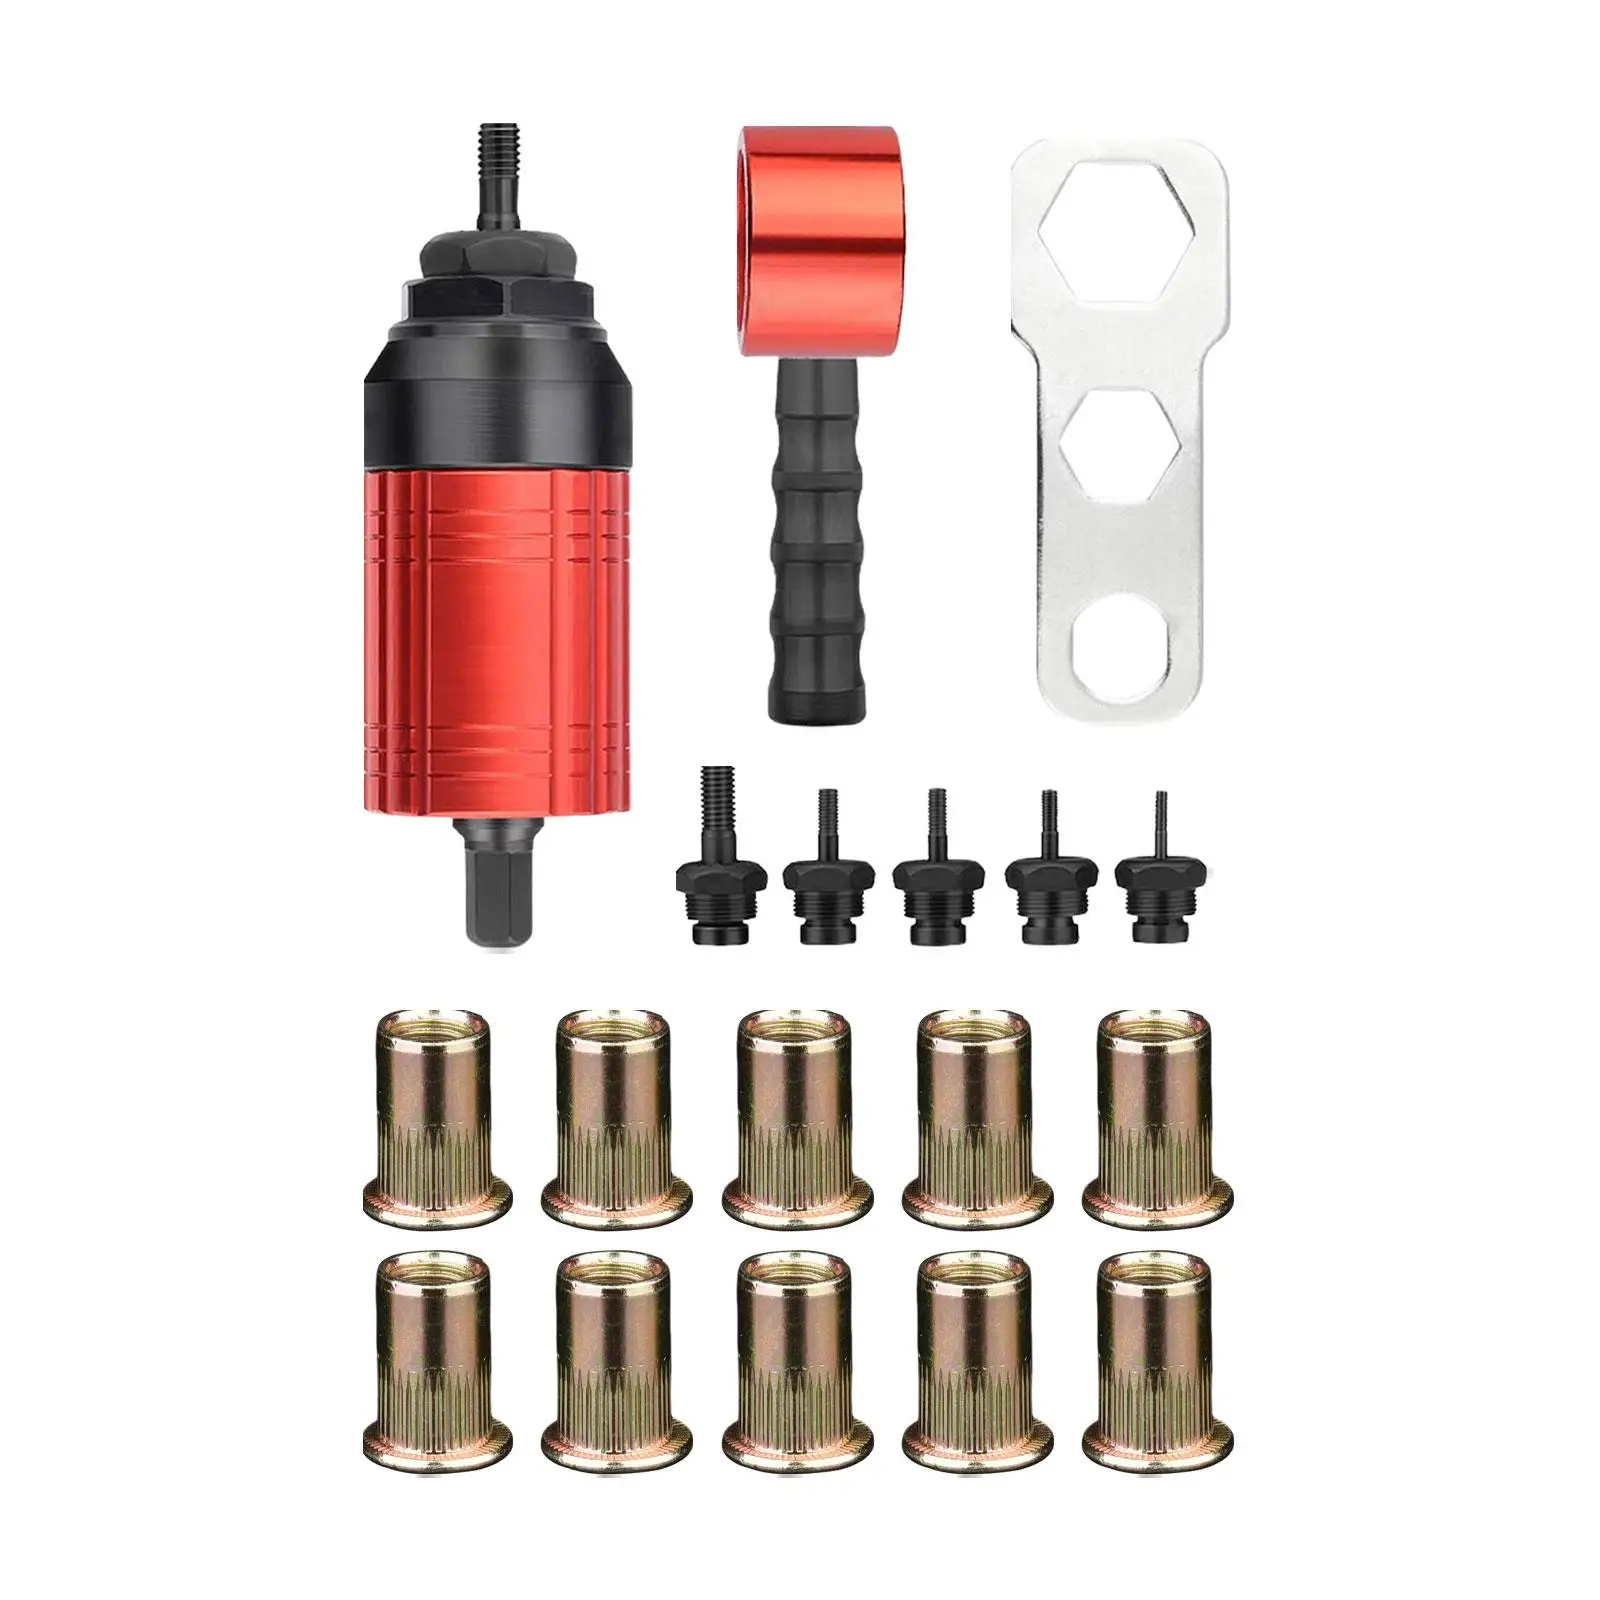 Rivet Nut Drill Adaptor Nut Tool for Ship Furniture Electrical Appliance